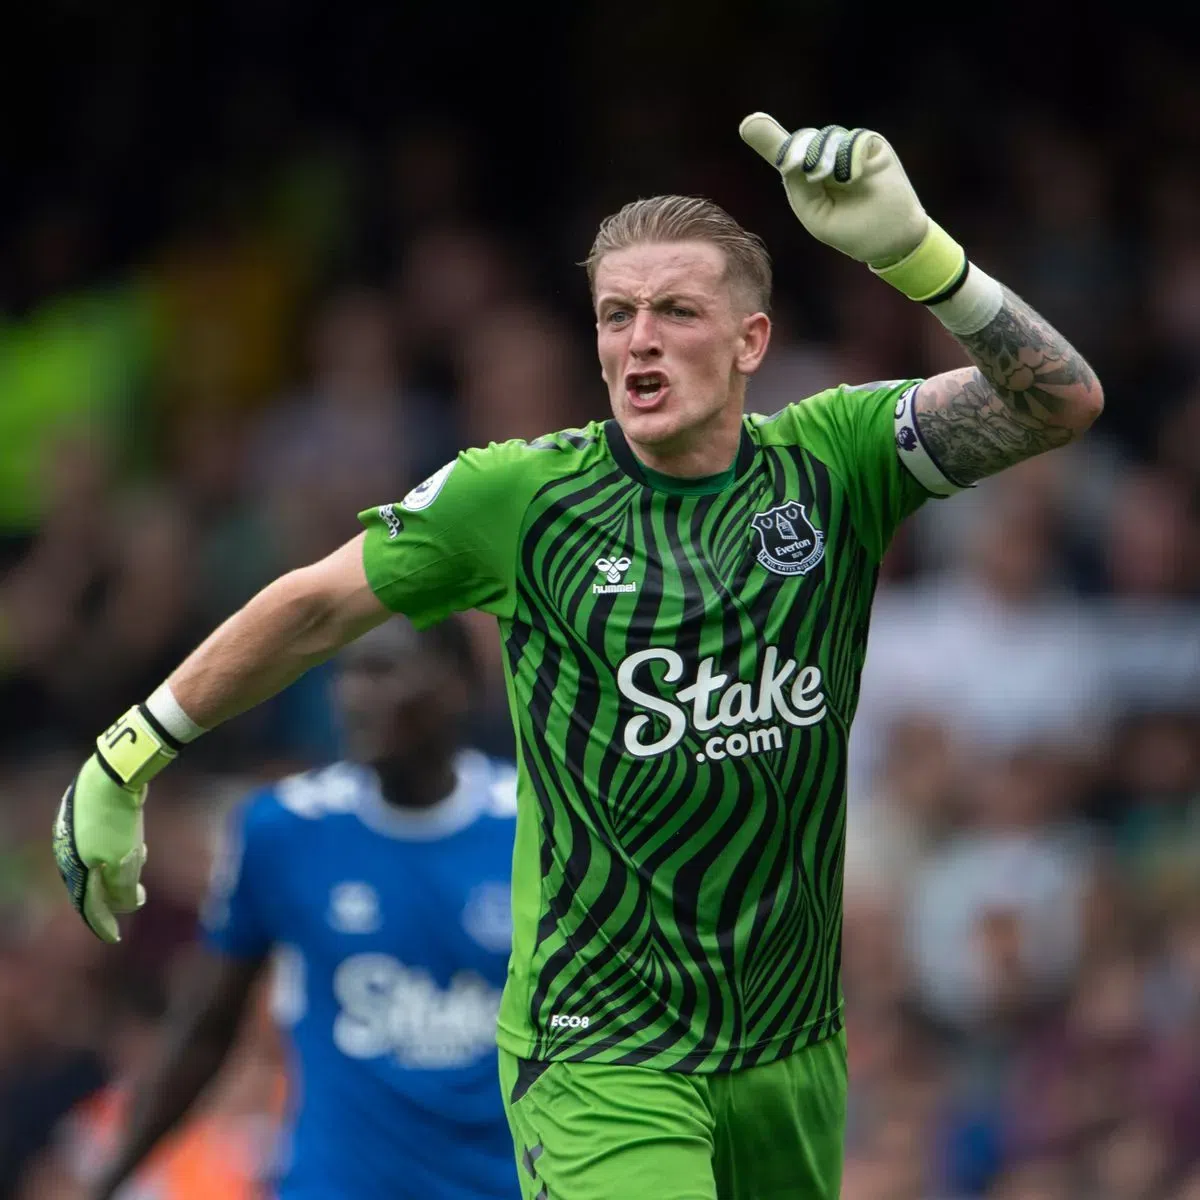 Jordan Pickford is England and Everton's first-choice goalkeeper